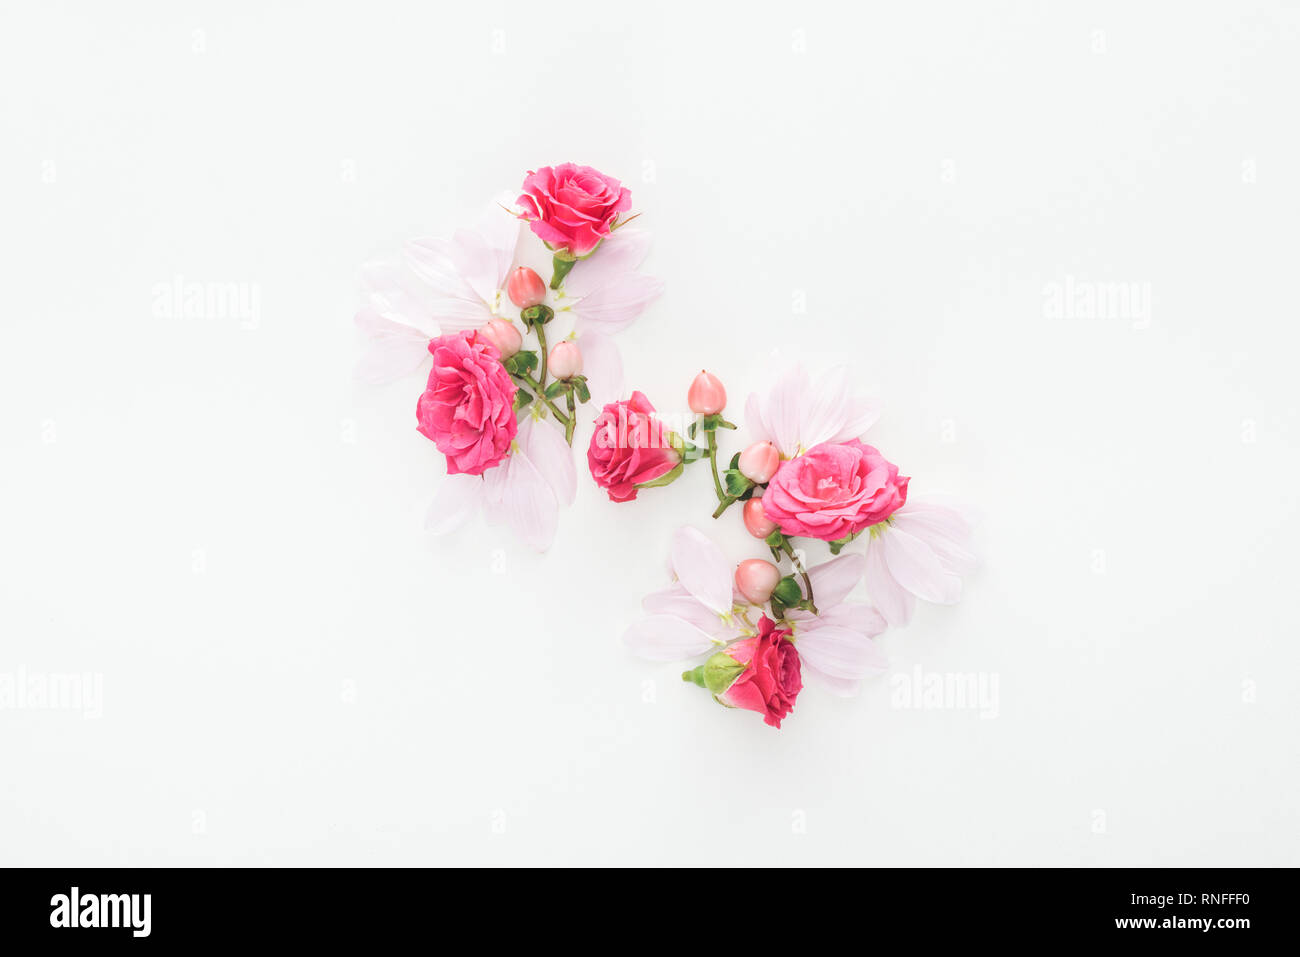 top view of composition with roses buds, berries and petals on white background Stock Photo